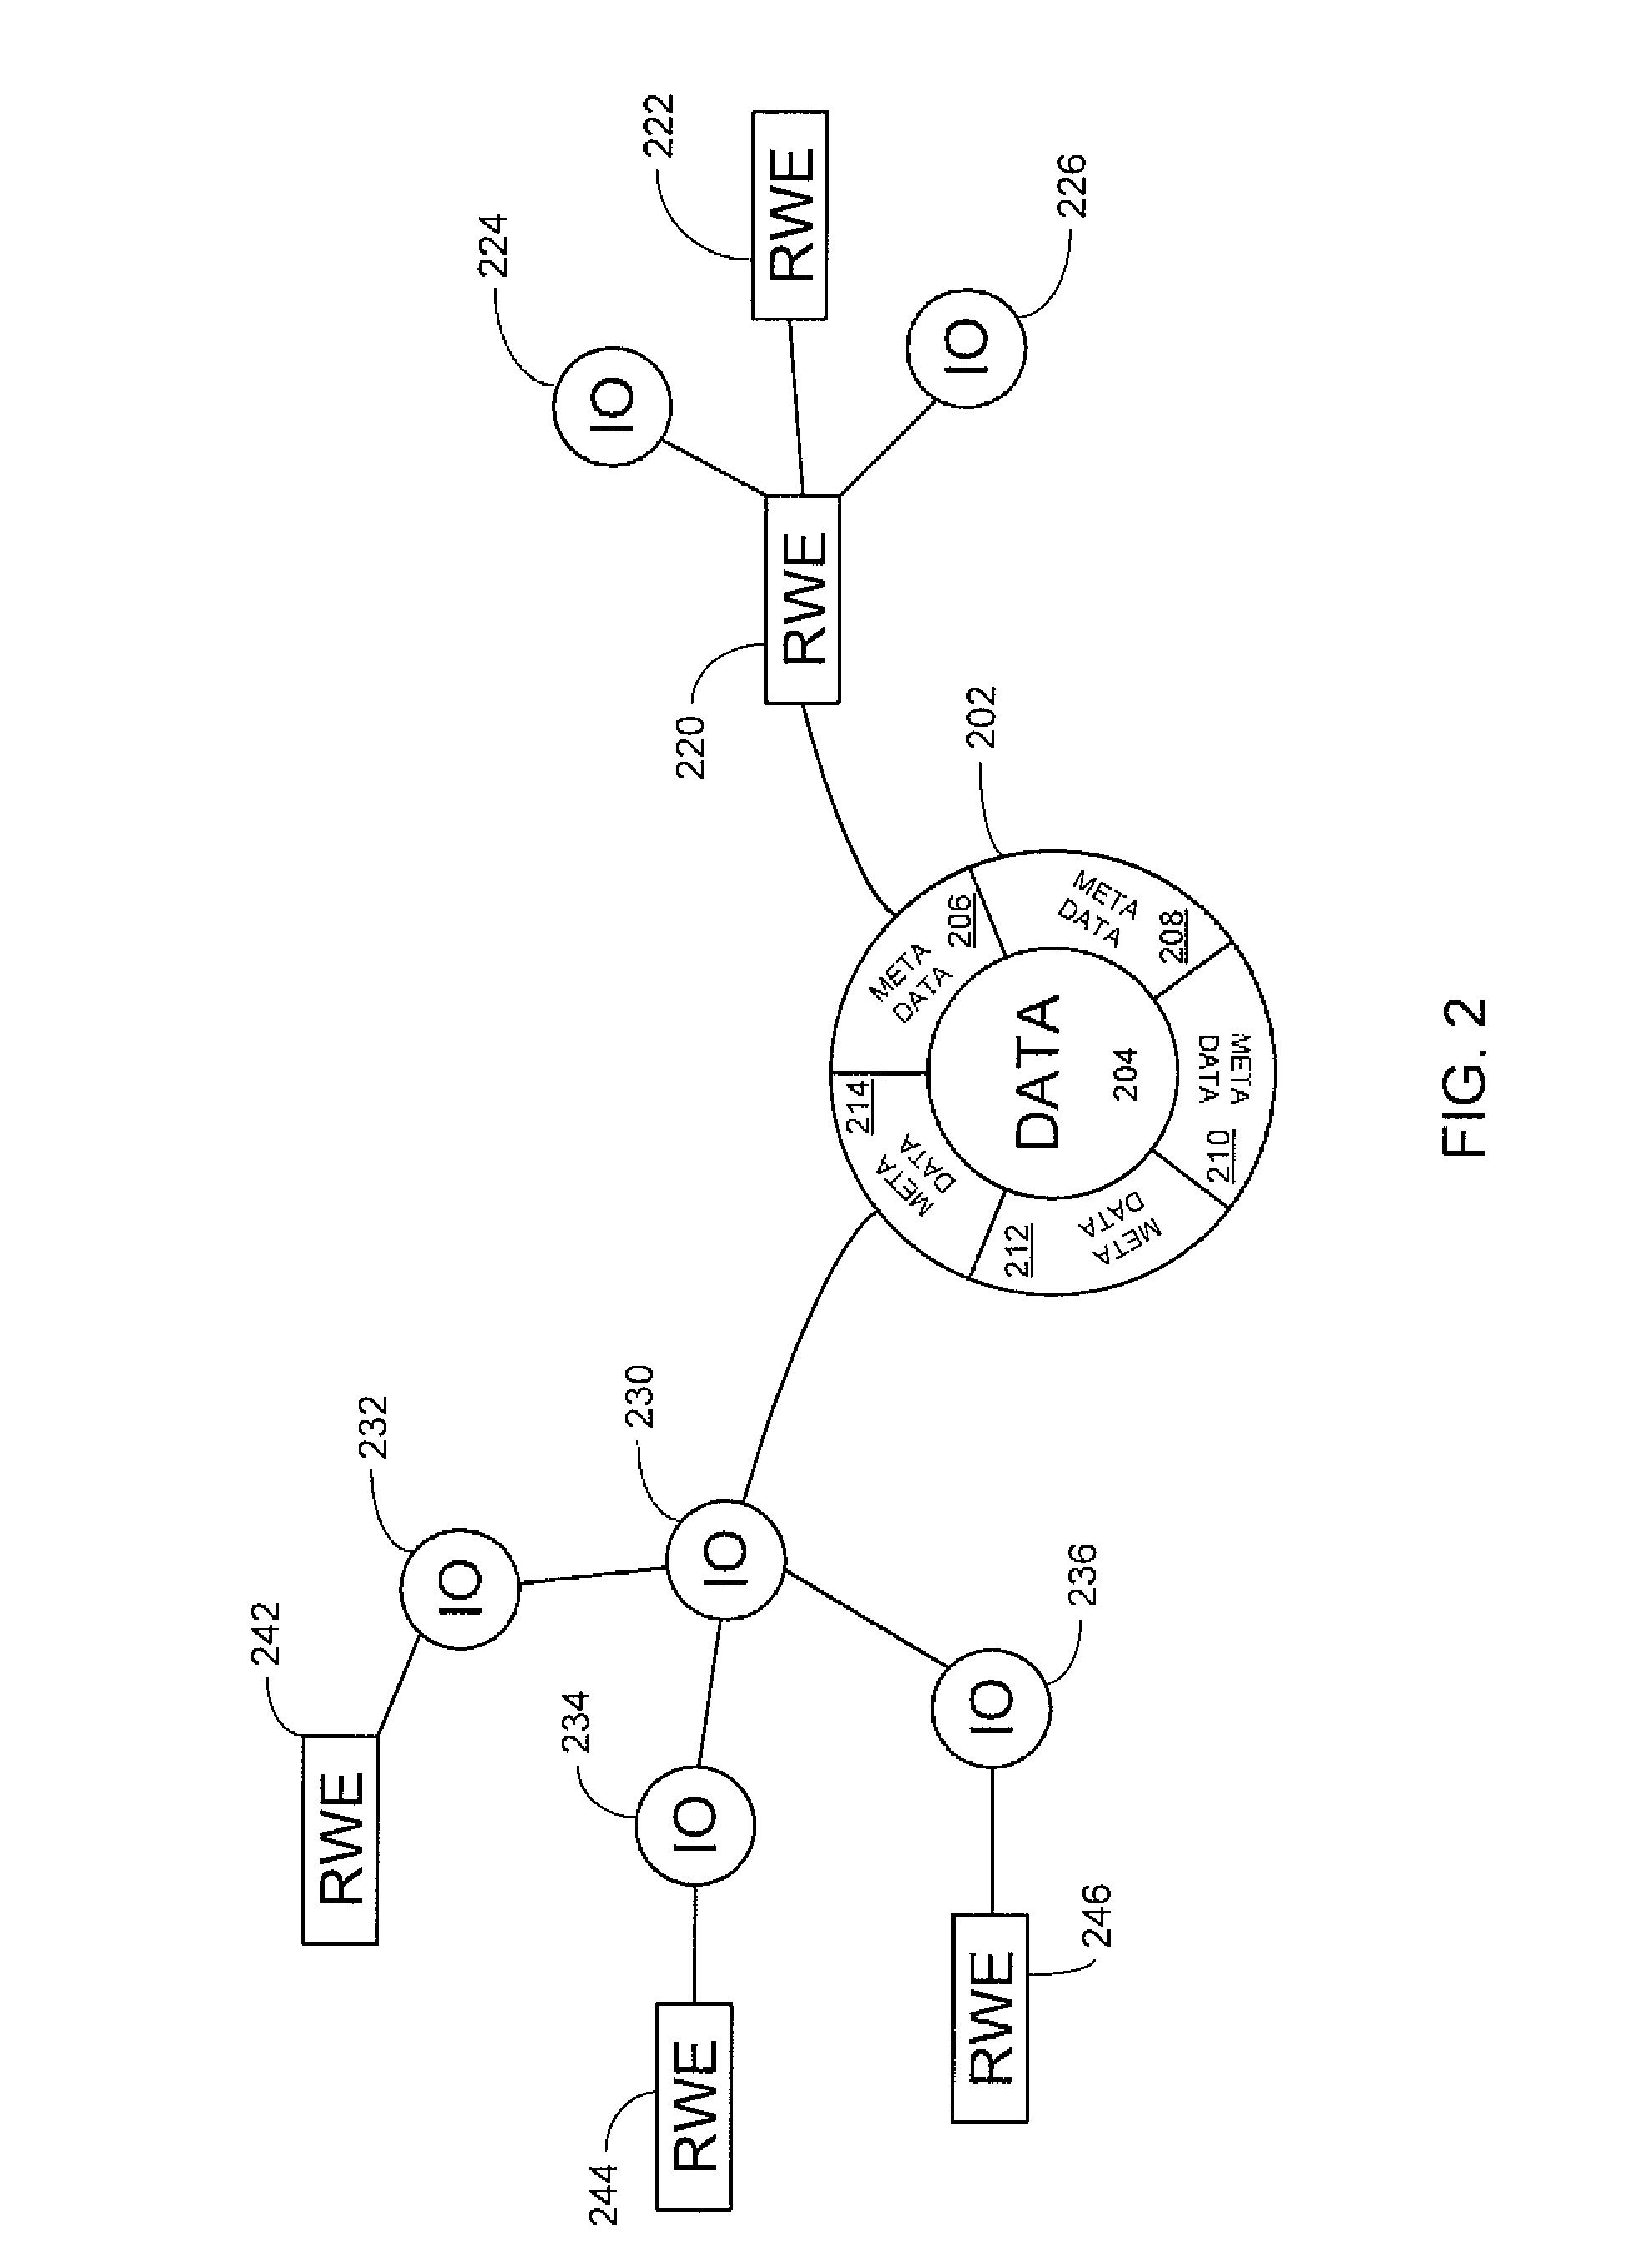 System and method for presentation of media related to a context